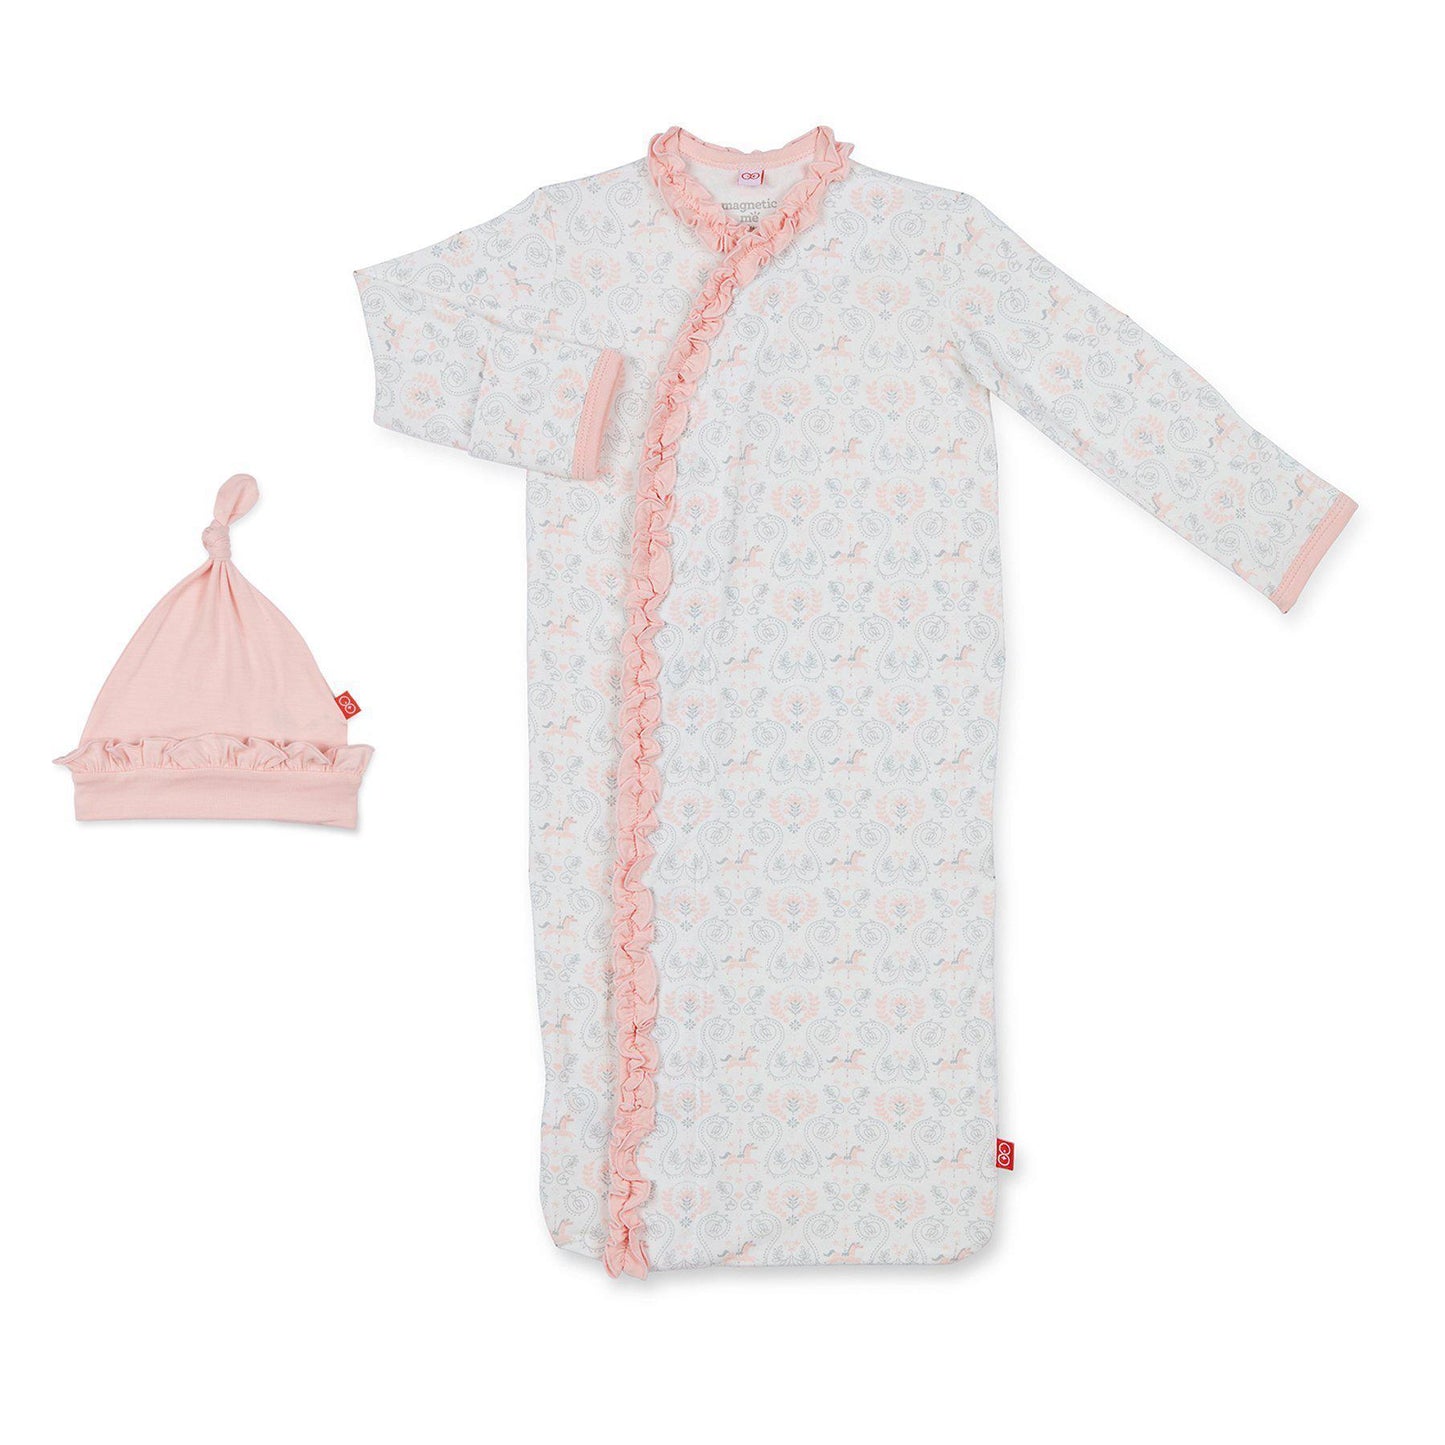 Carousel Magnetic Modal Sack Gown and Hat Set Newborn-3 months - Doodlebug's Children's Boutique